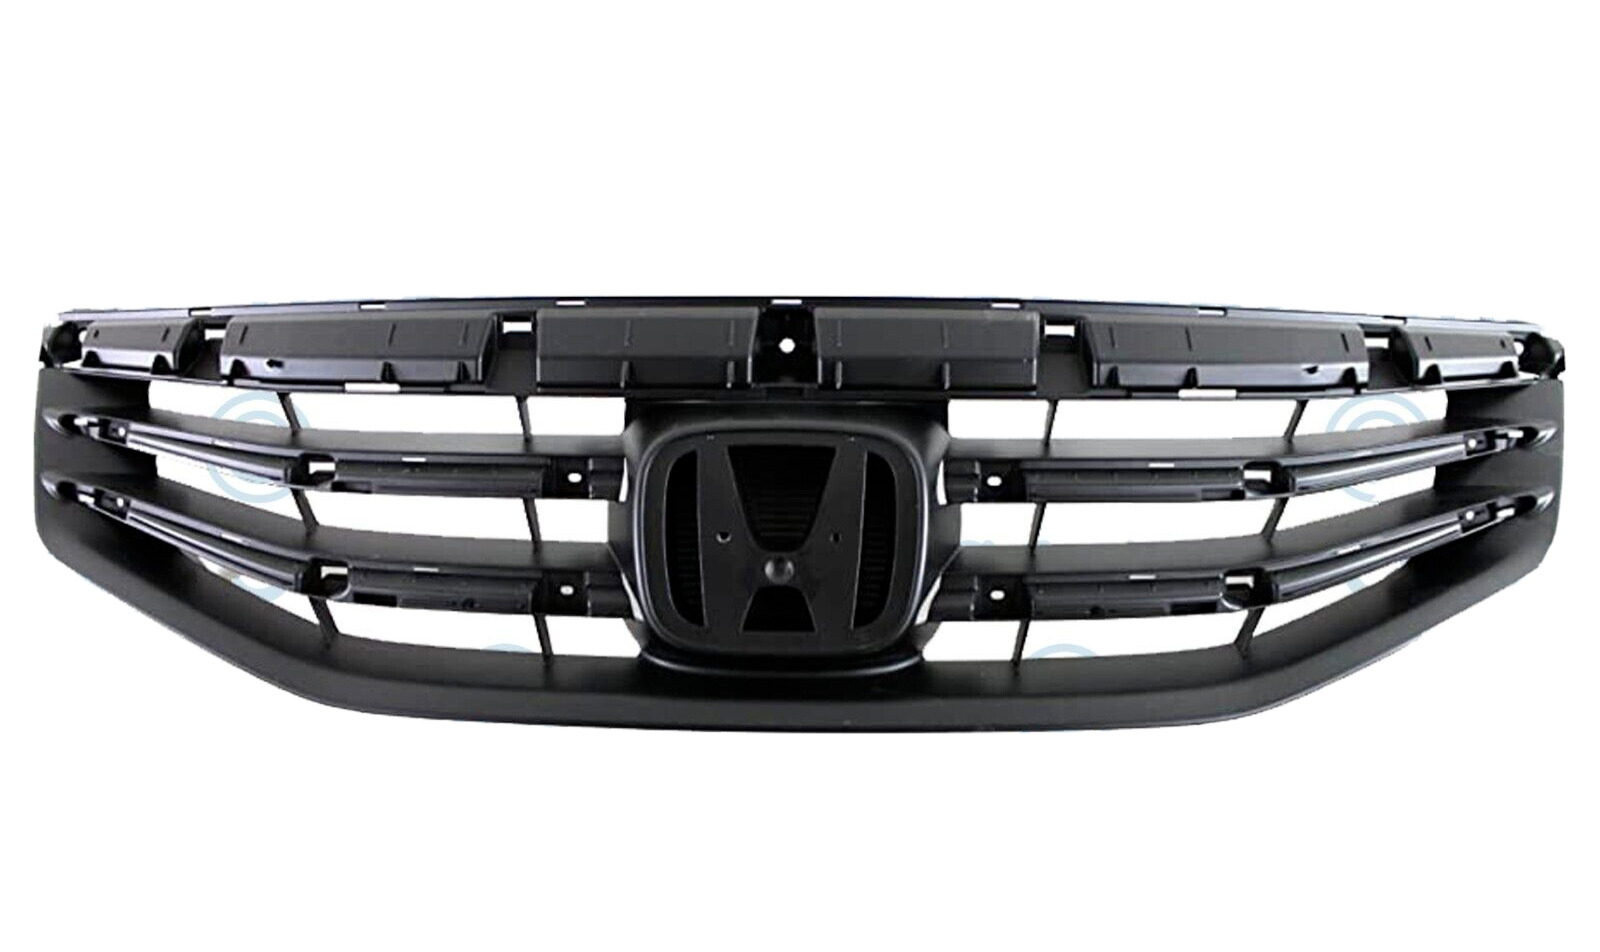 HO1200203 Front Bumper Grille Grill W/Chrome Trim For Honda Accord 2011-2012